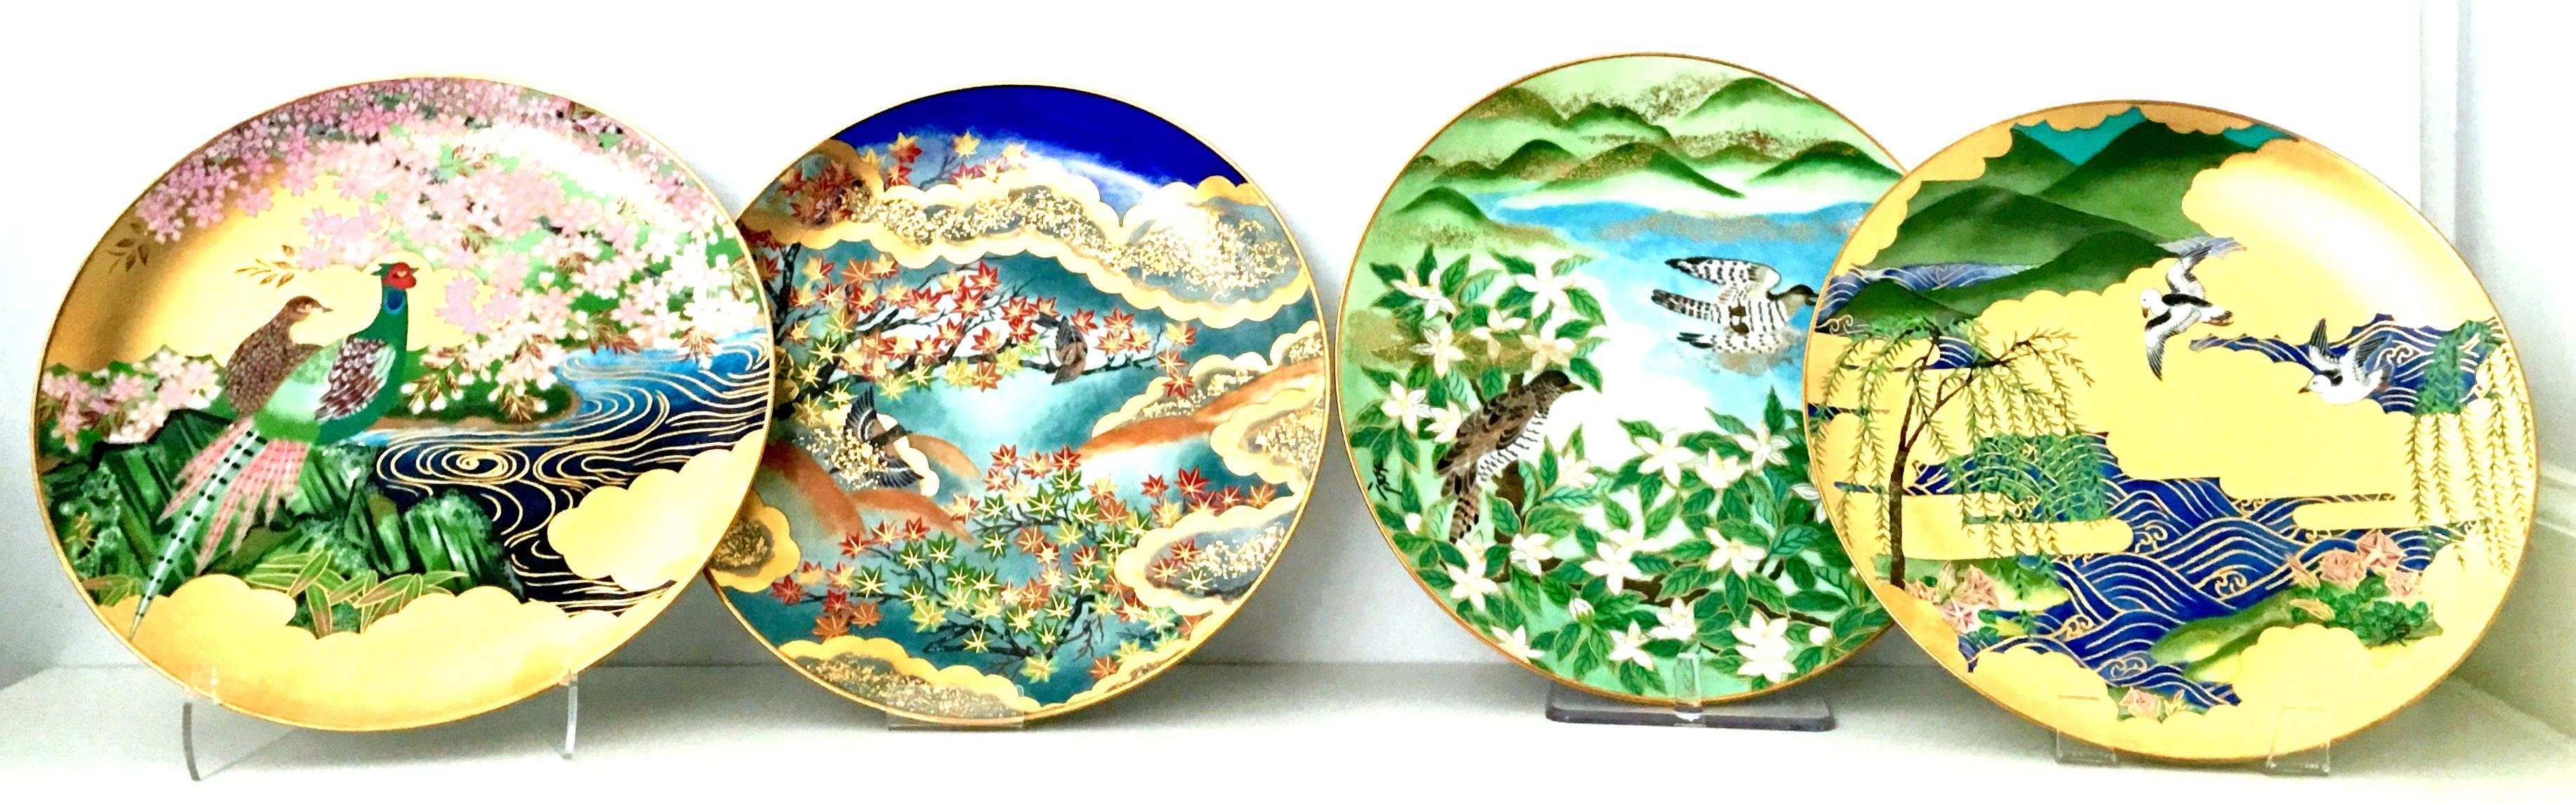 1986 limited edition Japanese porcelain & 22-karat gold collectors plates by, The Hamilton Collection. This Limited edition set of four collectors plates are from the 